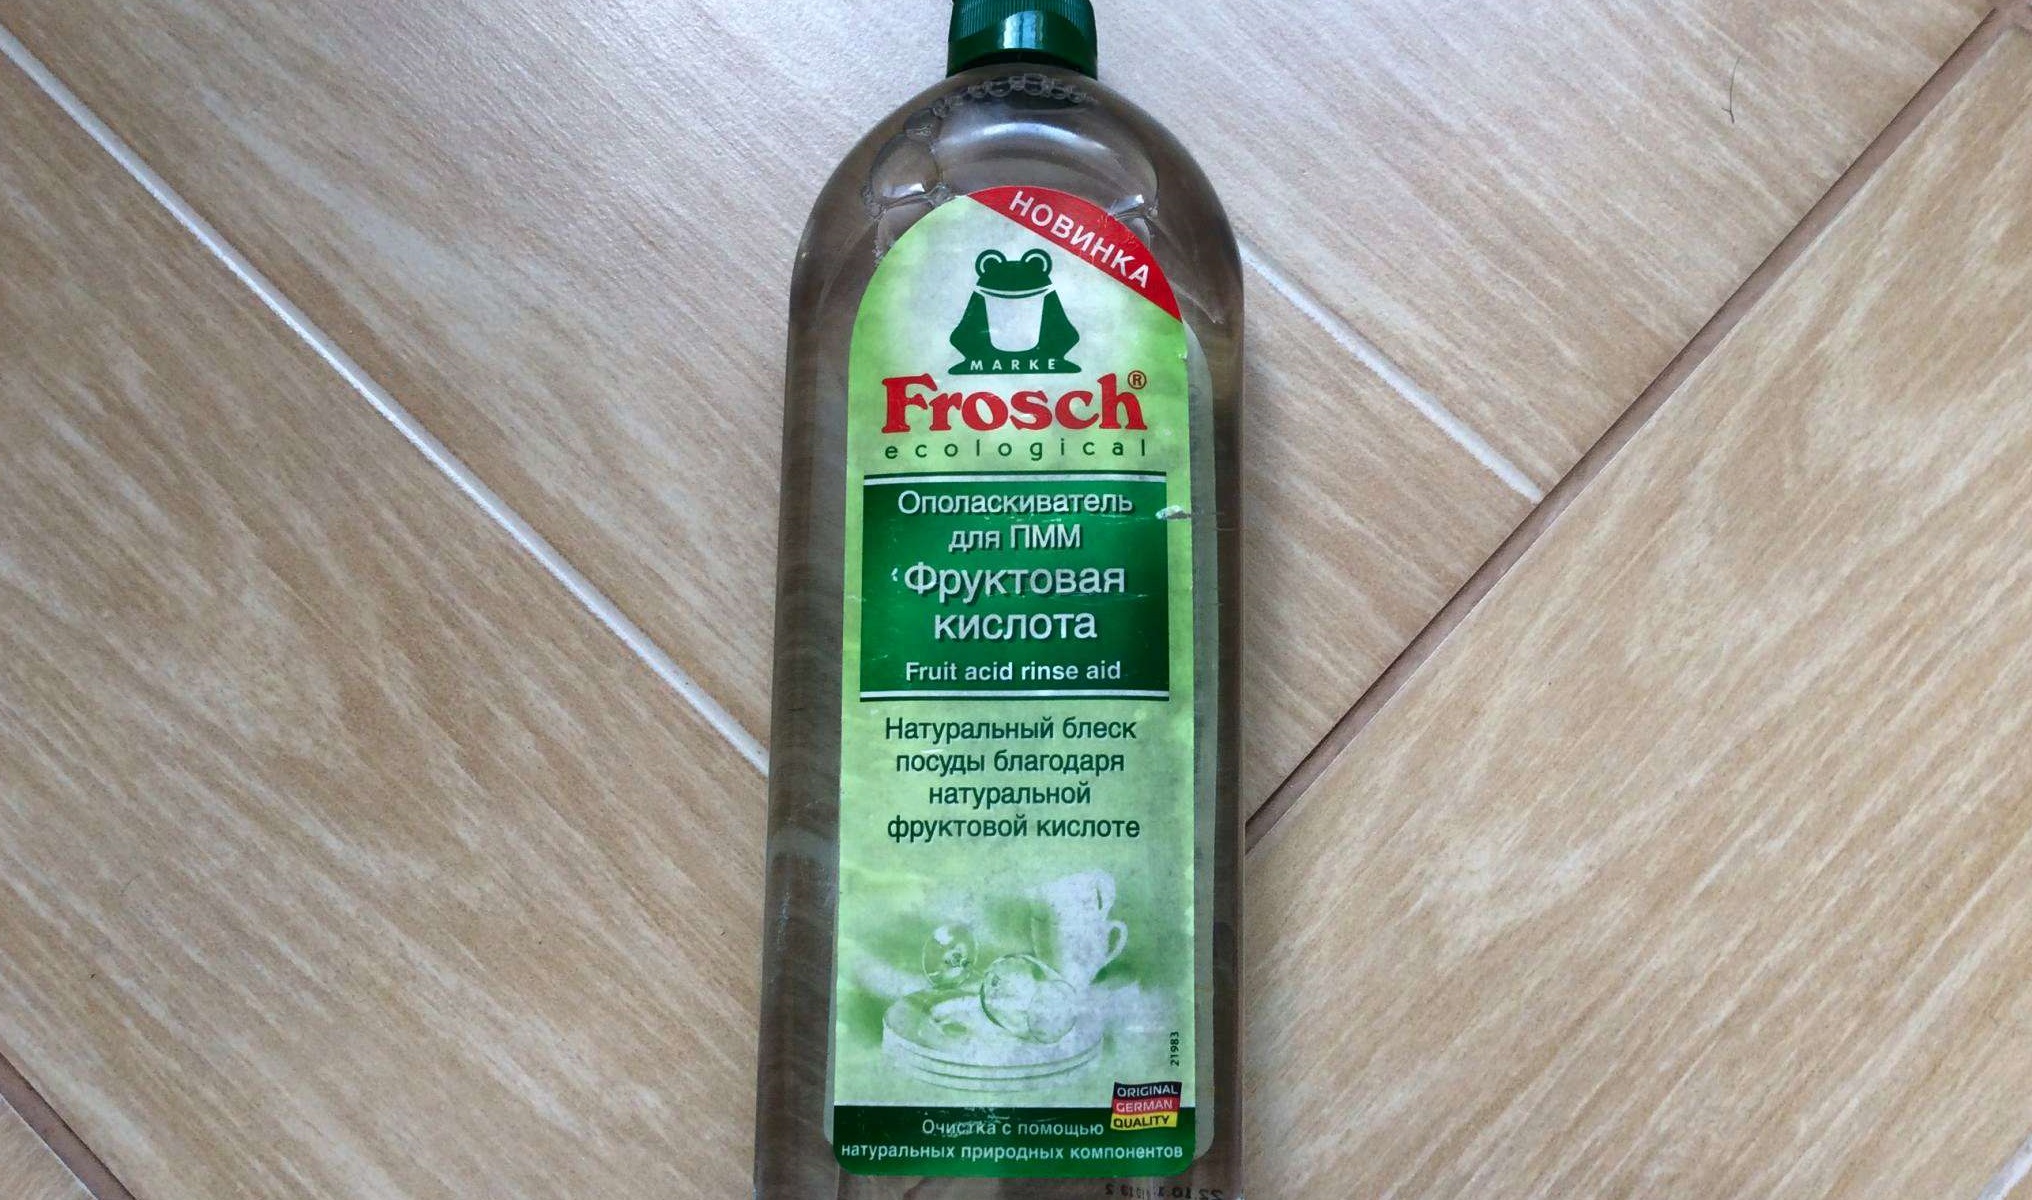 Frosch rinse aid for PMM